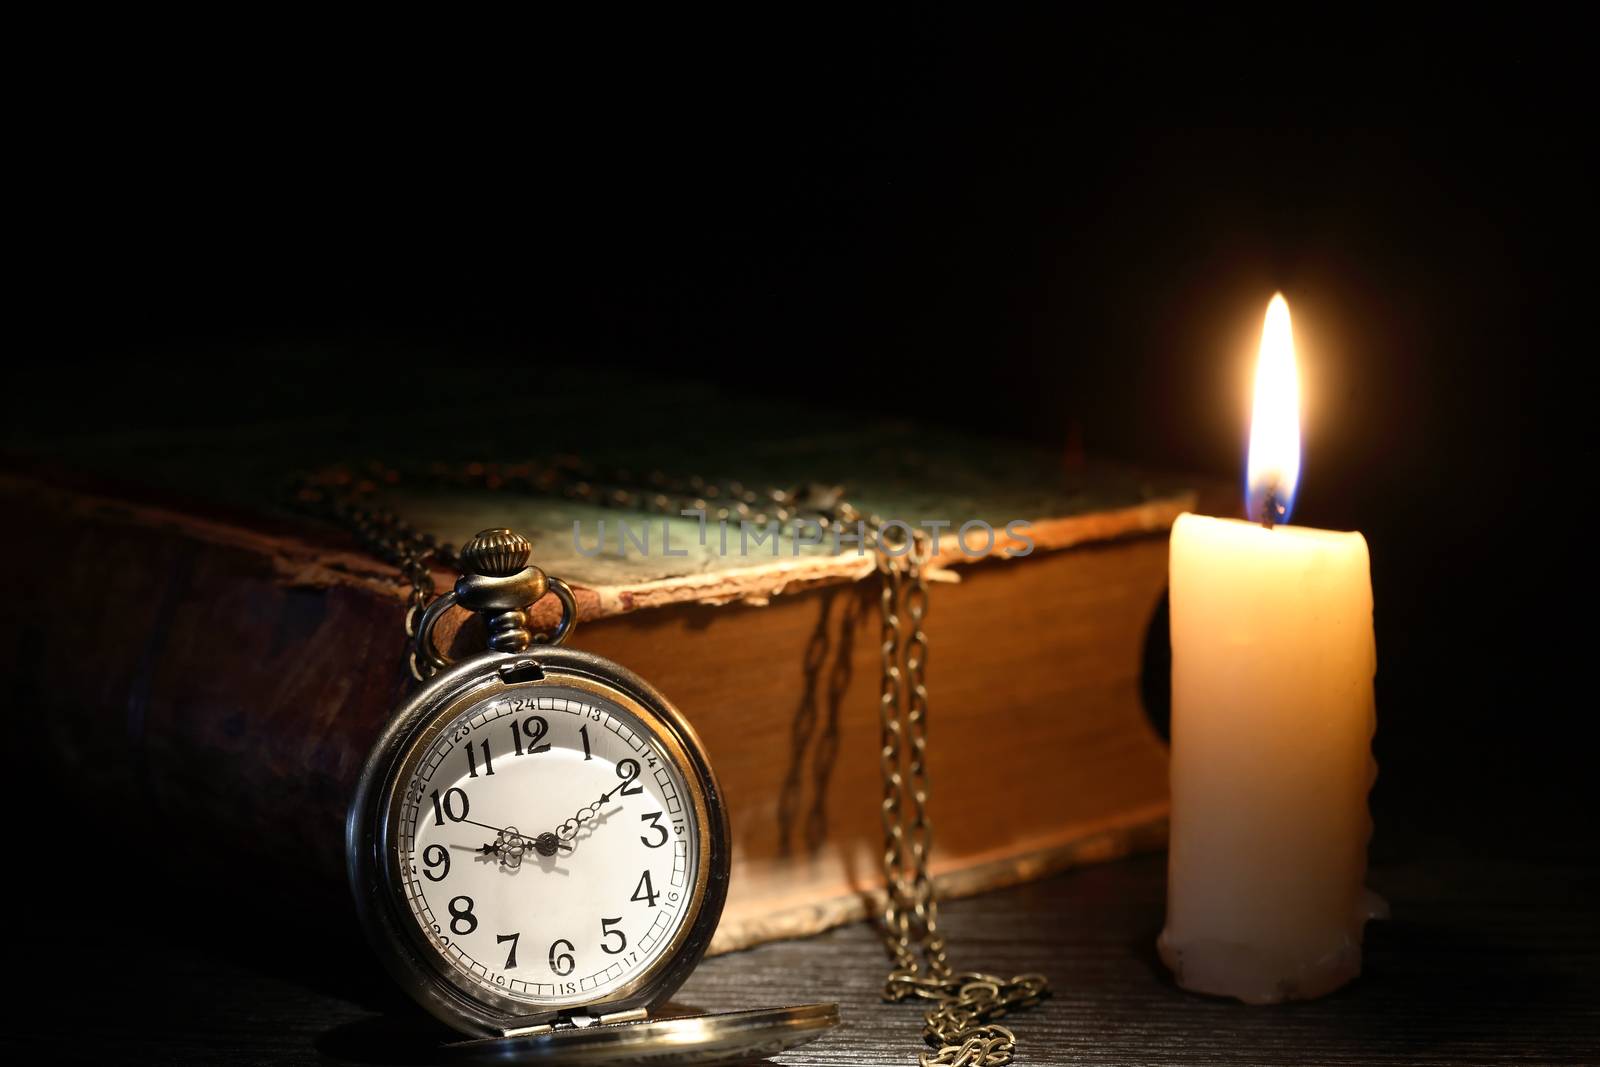 Old pocket watch near old book and candle on dark background